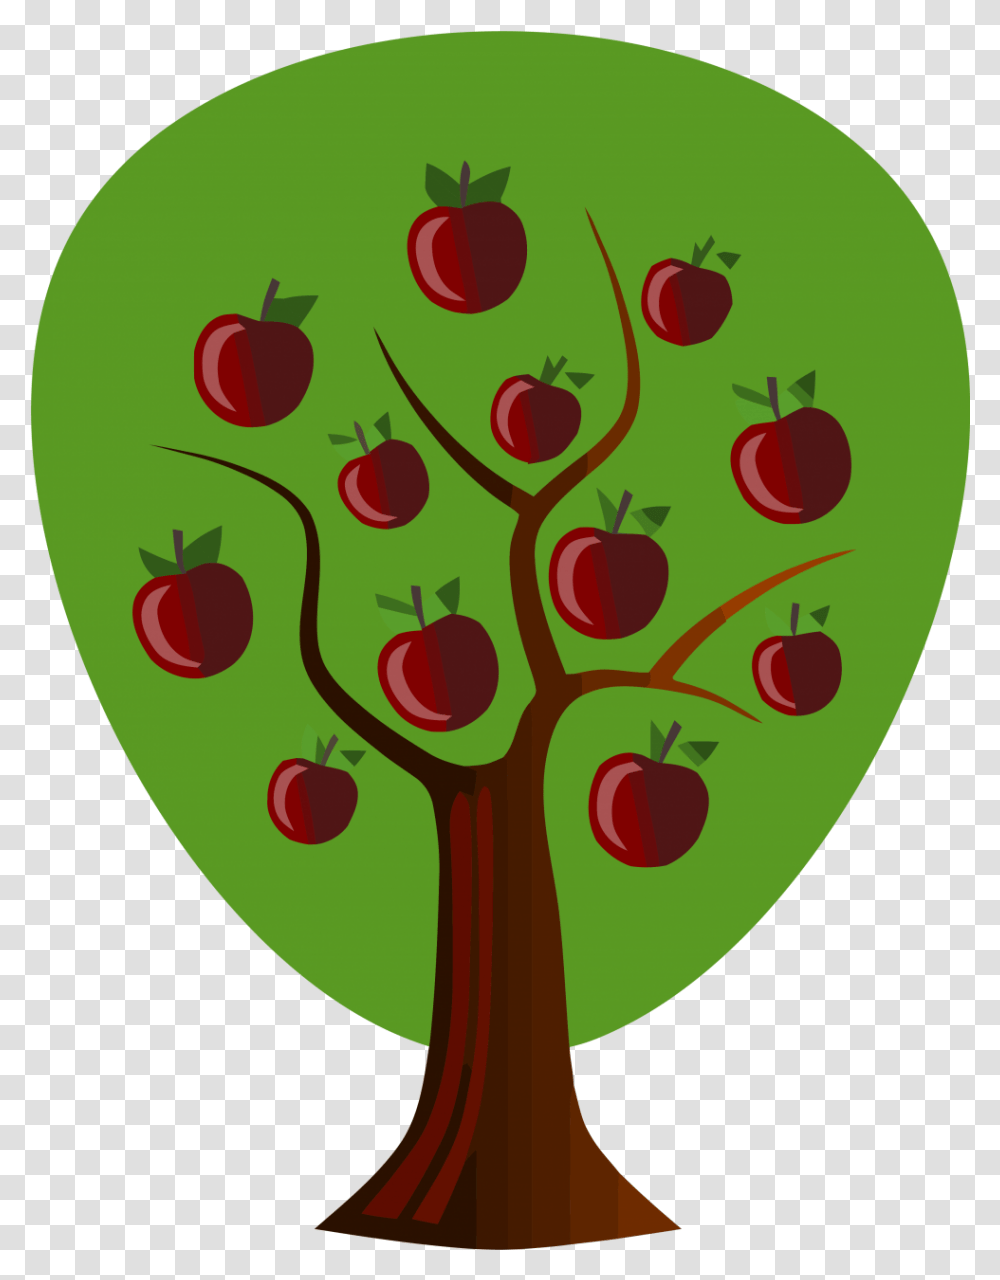 Apple Tree One Clipart - Clipartlycom Tree Clipart One Tree, Plant, Graphics, Cutlery, Heart Transparent Png